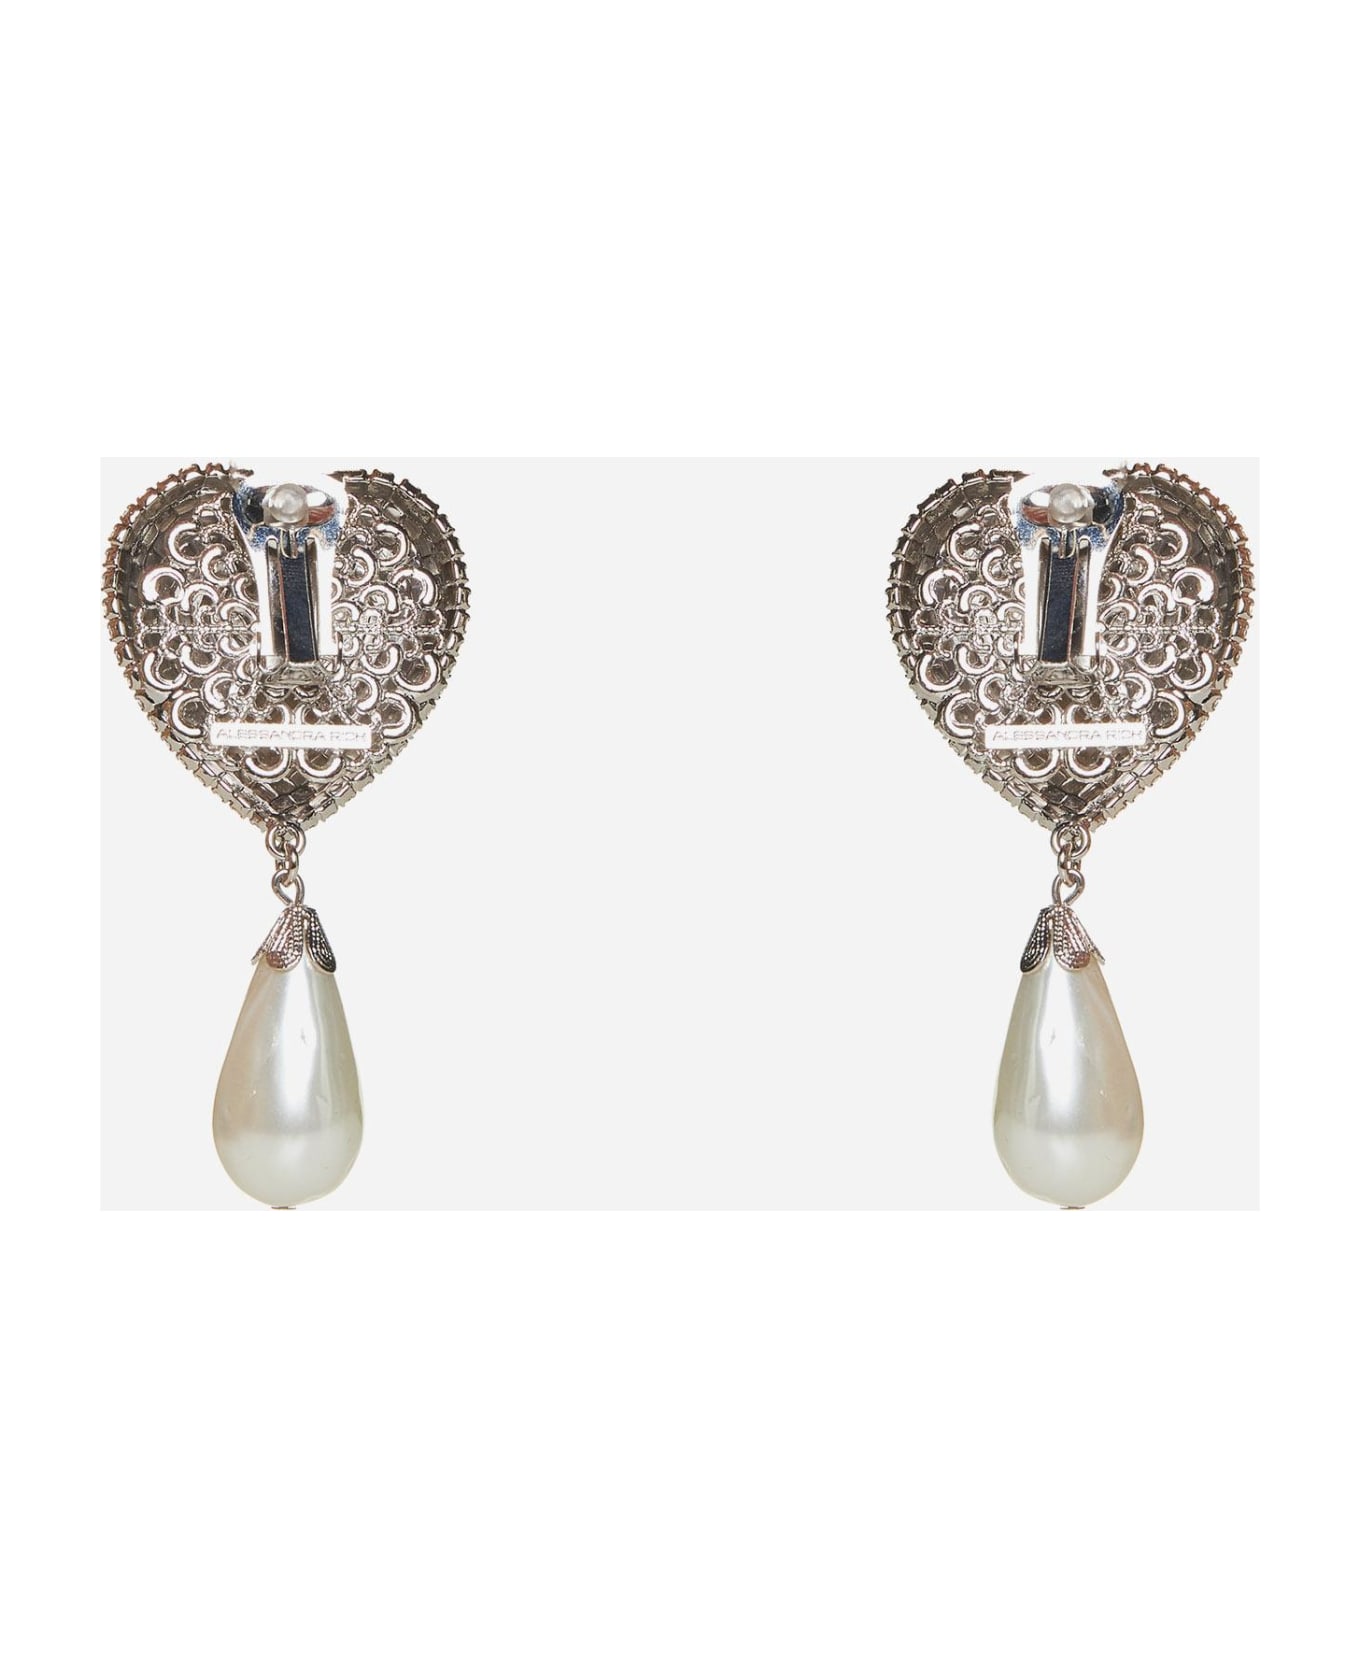 Alessandra Rich Heart Crystals And Pearl Earrings - SILVER イヤリング